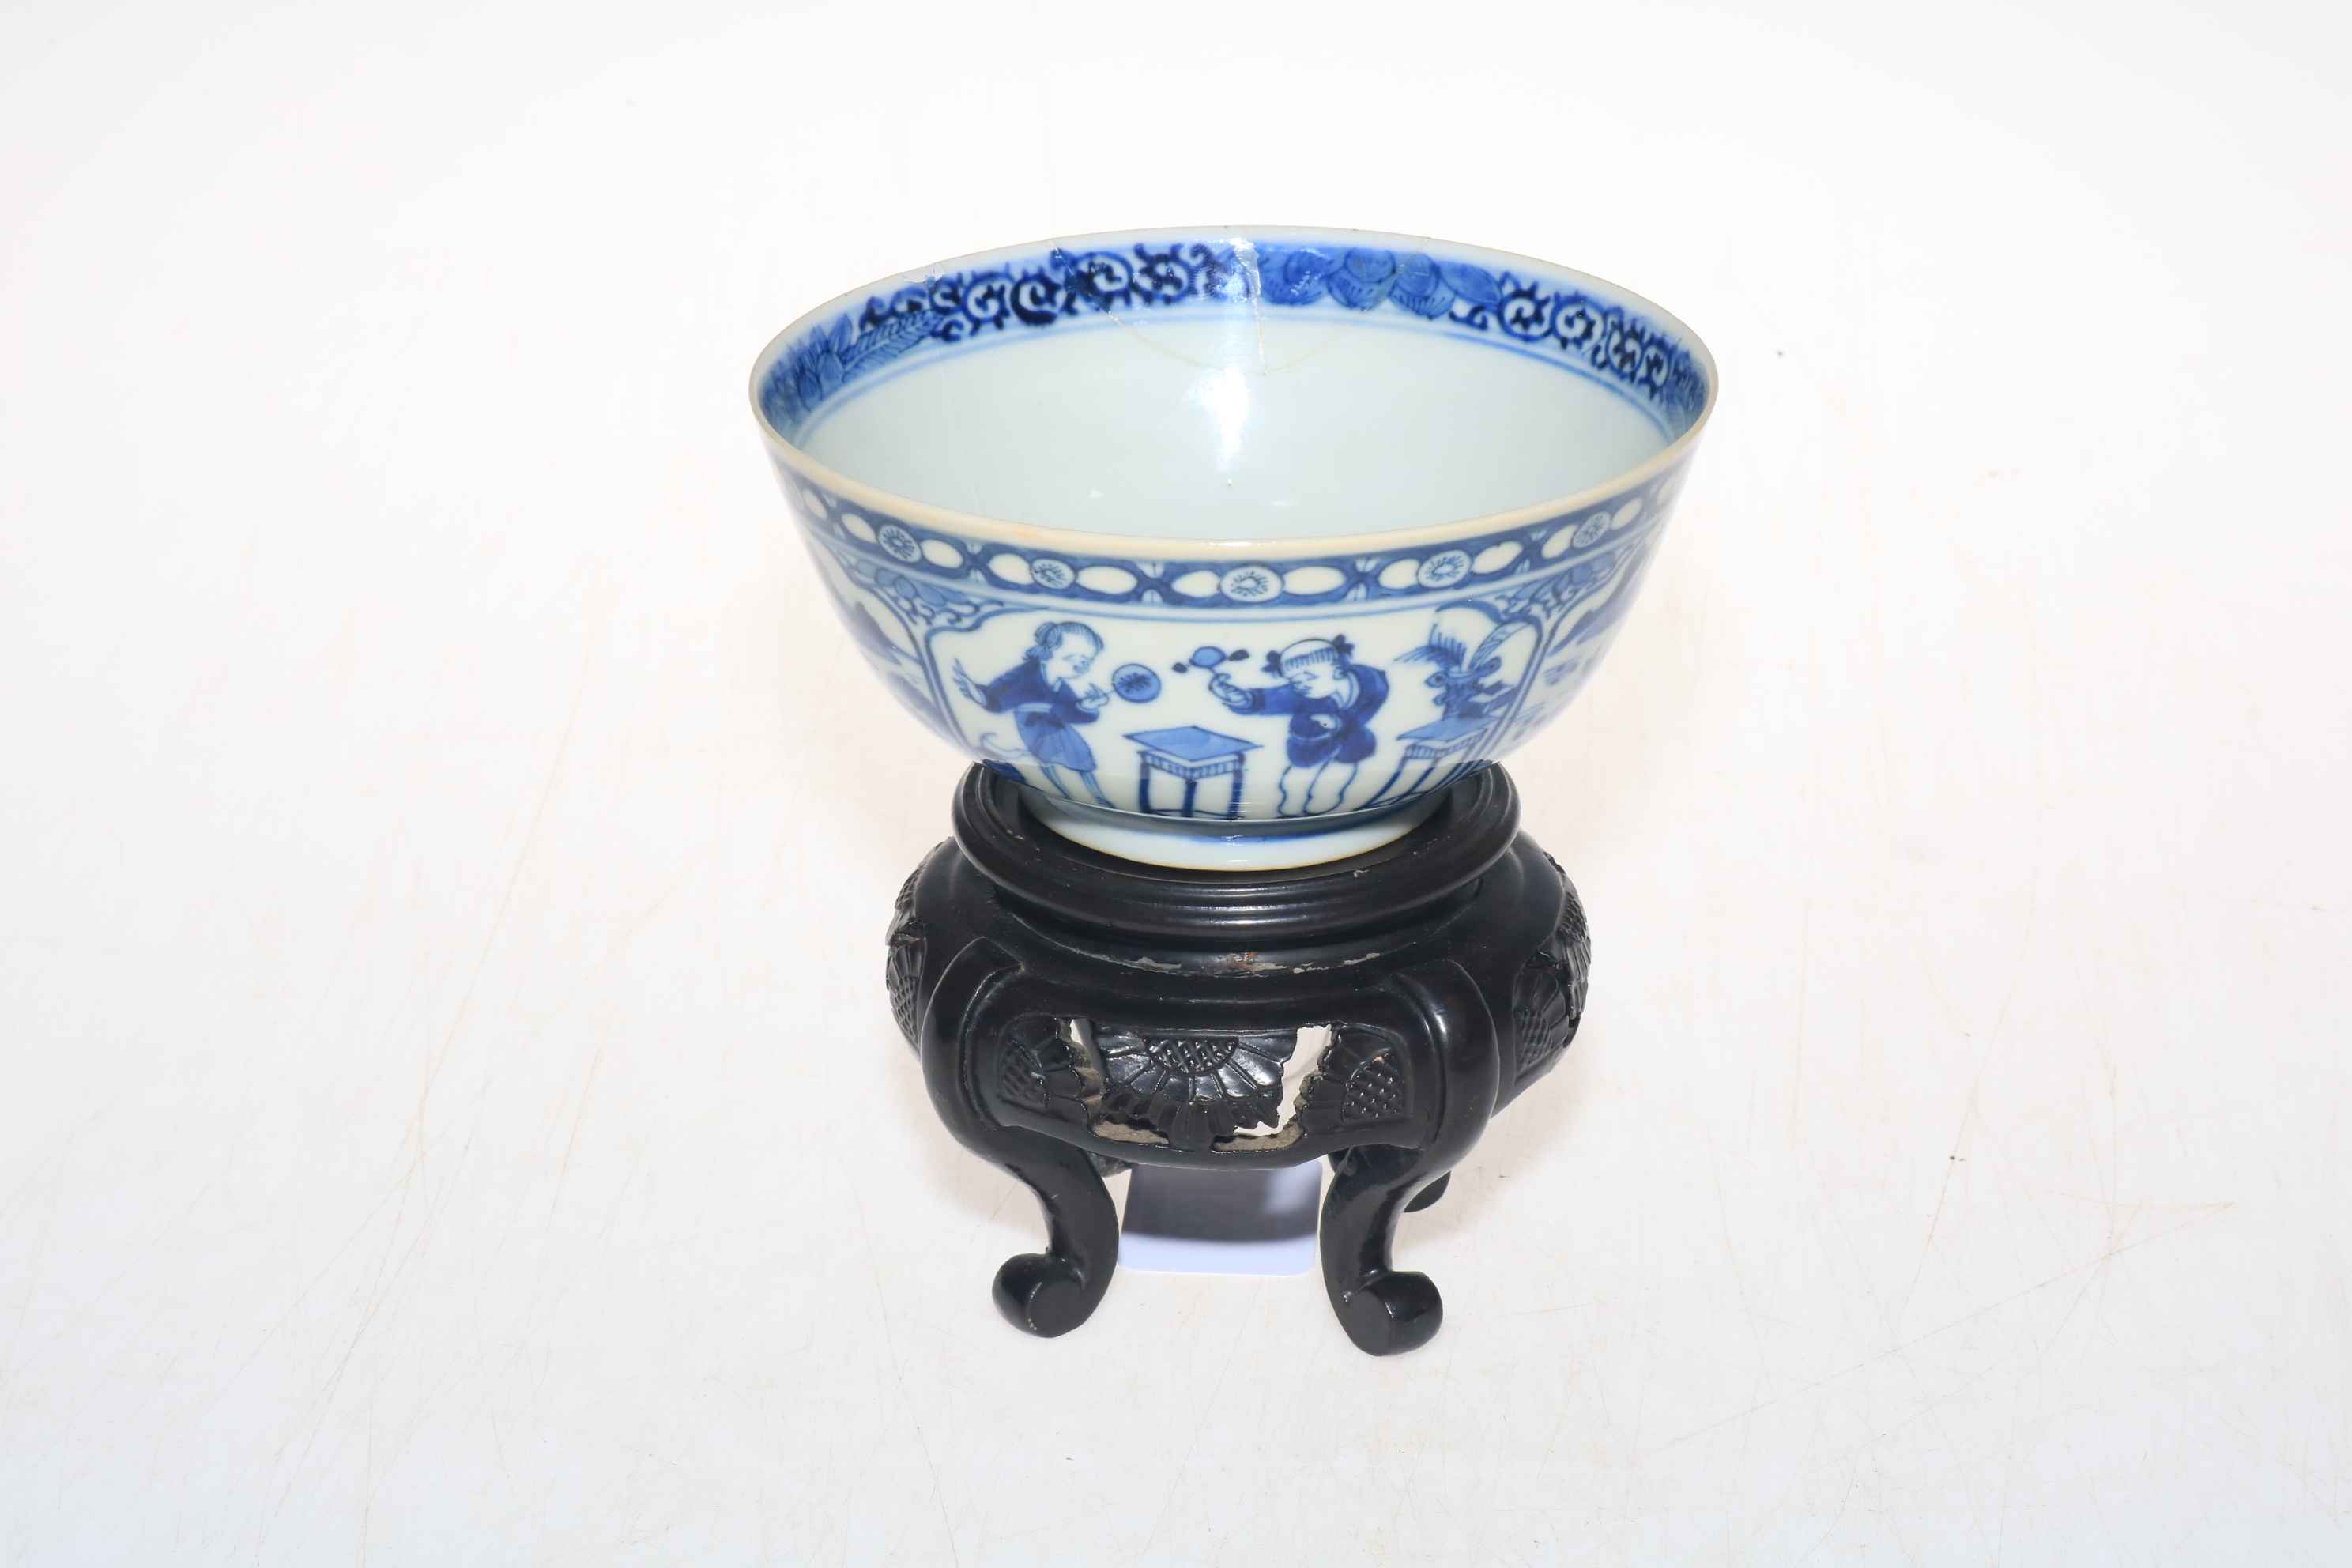 Chinese blue and white bowl with panels of decoration, 14.5cm diameter, with stand. - Image 5 of 6